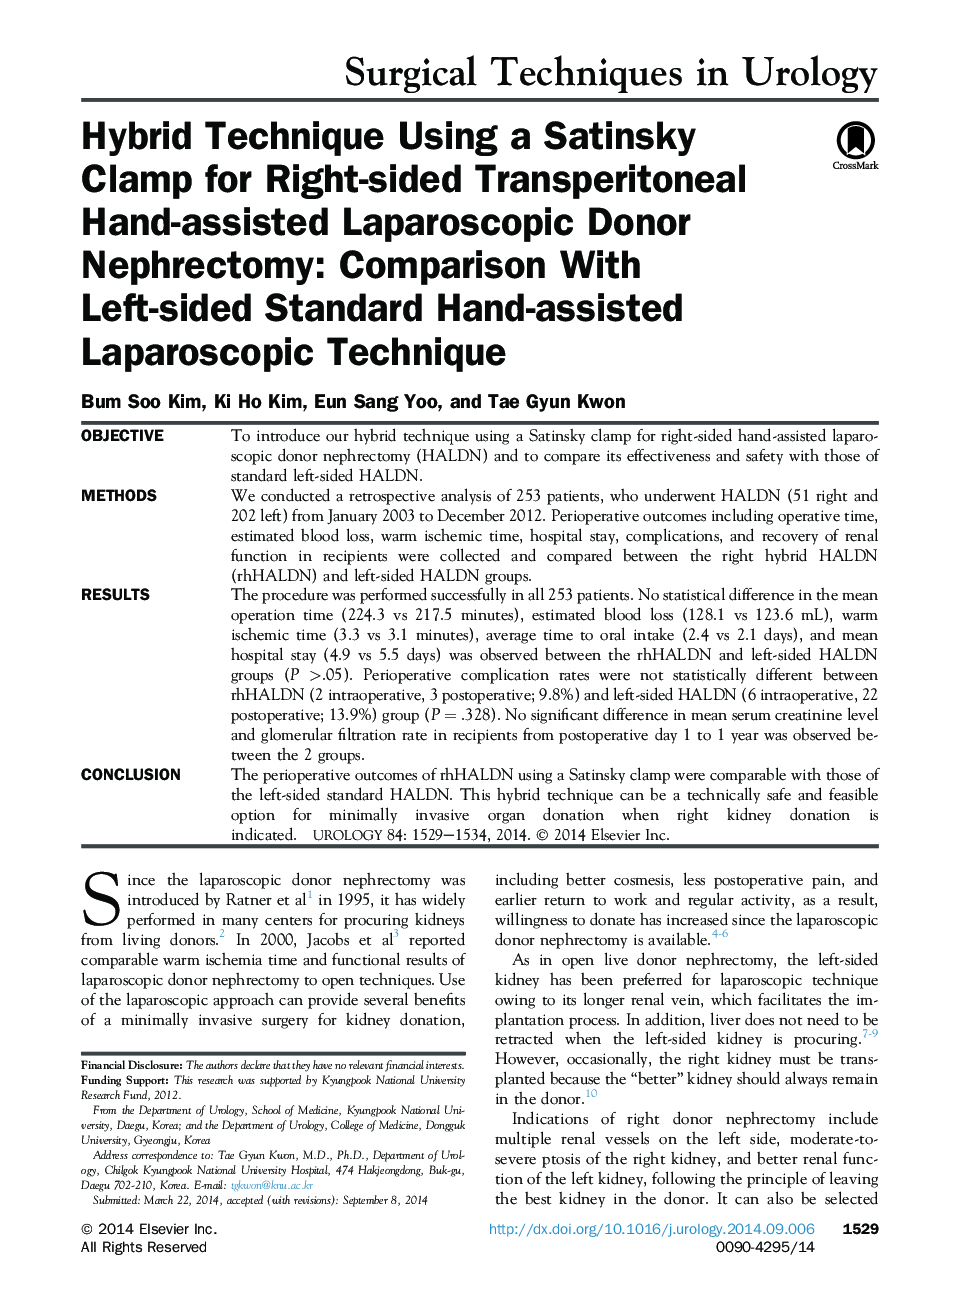 Hybrid Technique Using a Satinsky Clamp for Right-sided Transperitoneal Hand-assisted Laparoscopic Donor Nephrectomy: Comparison With Left-sided Standard Hand-assisted Laparoscopic Technique 